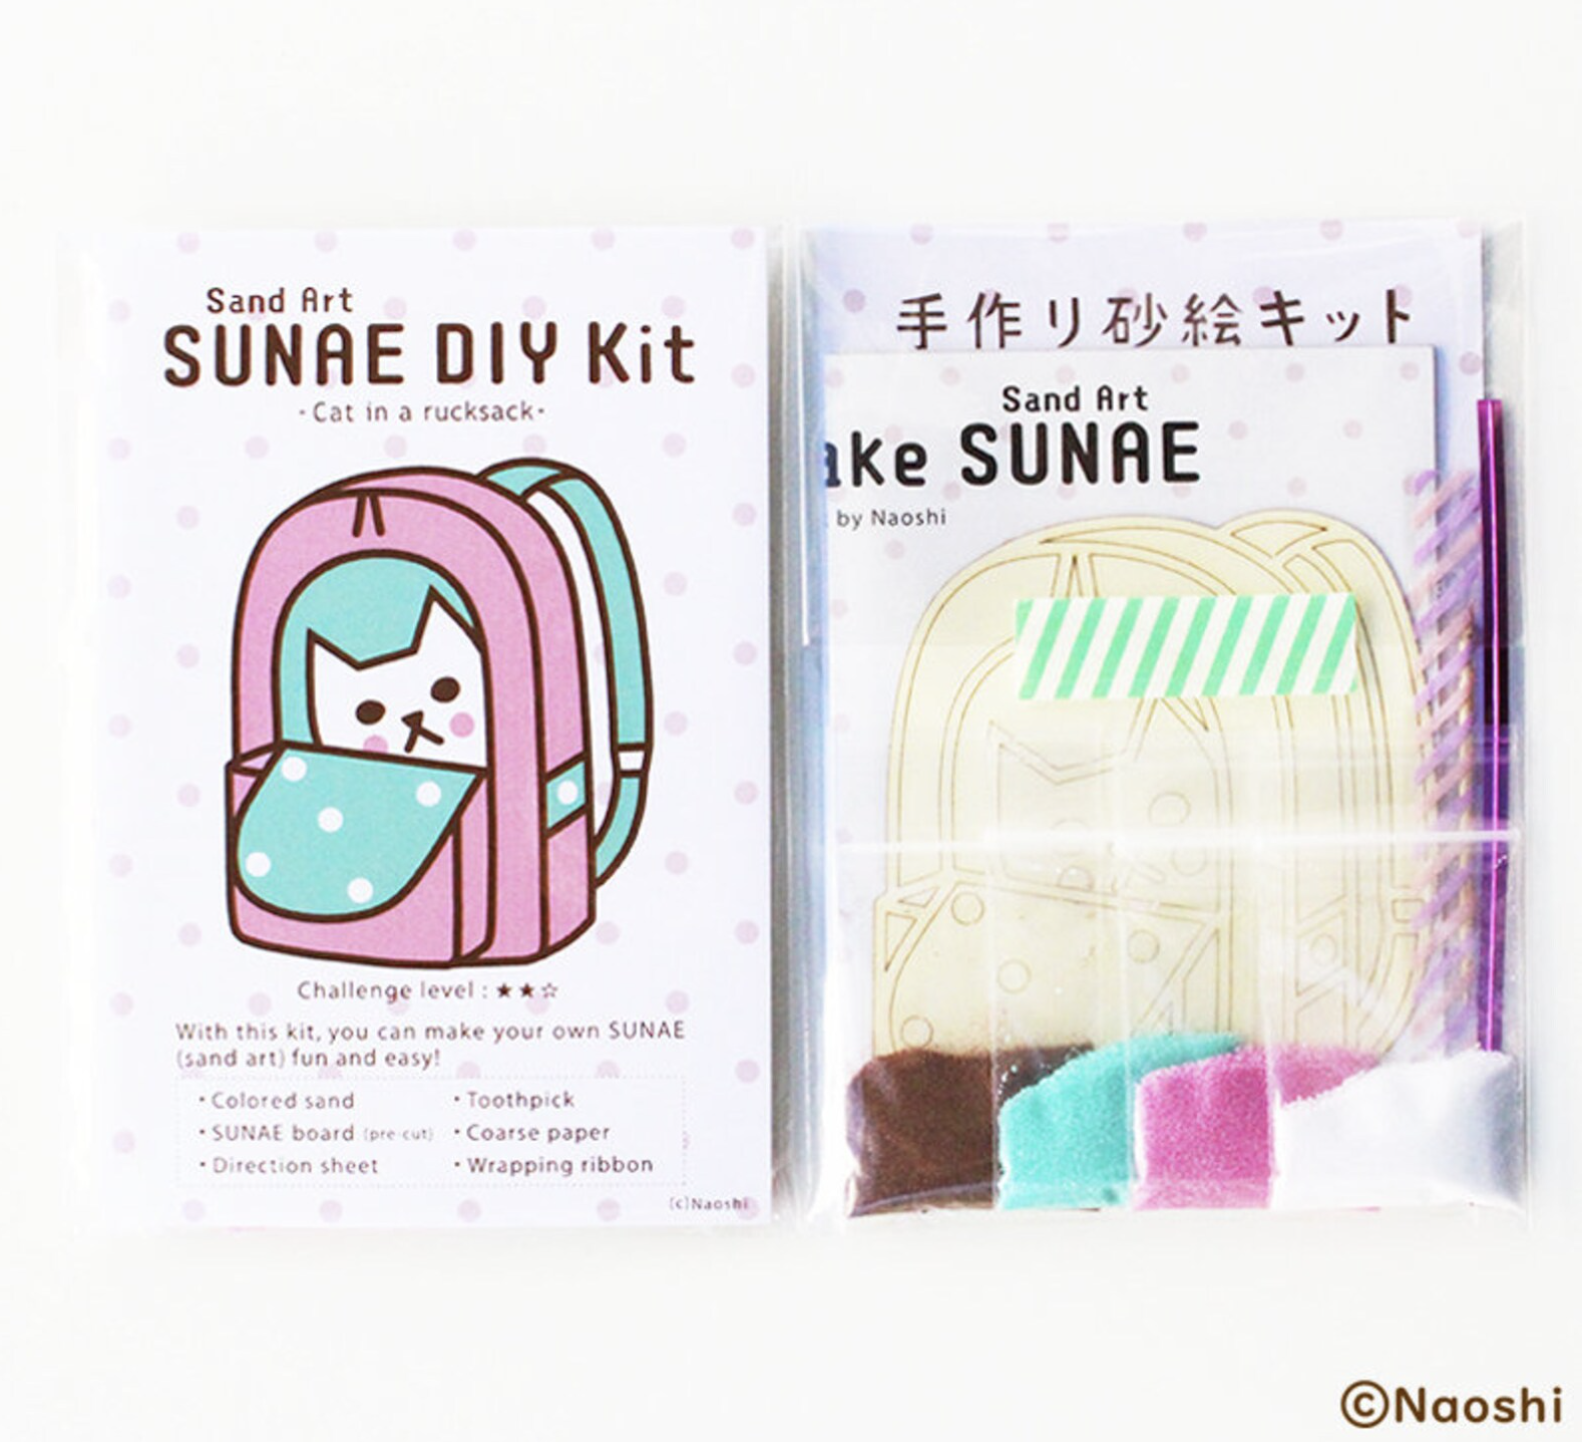 Front and back view of sand art package with artwork of a cat peeking out of an open backpack.